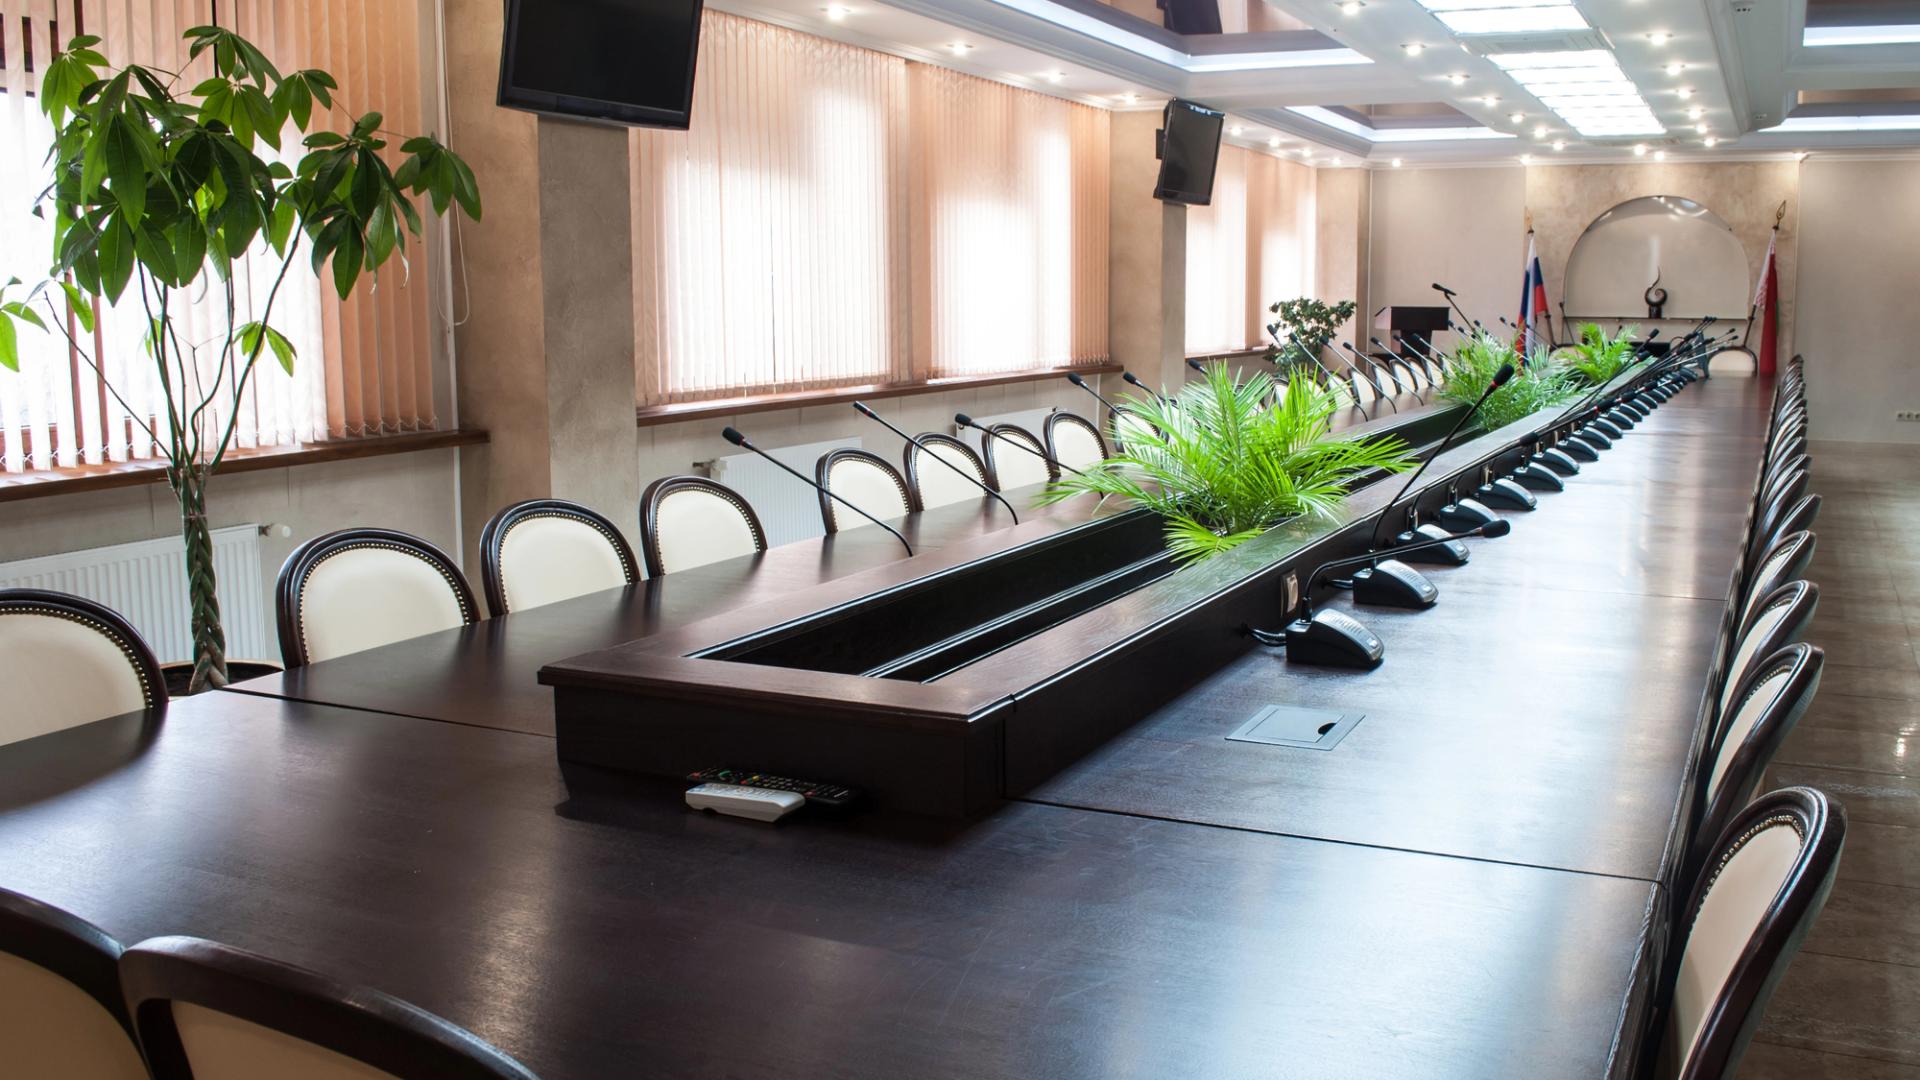 Hotel Conference Rooms for Rent in Atlanta, GA